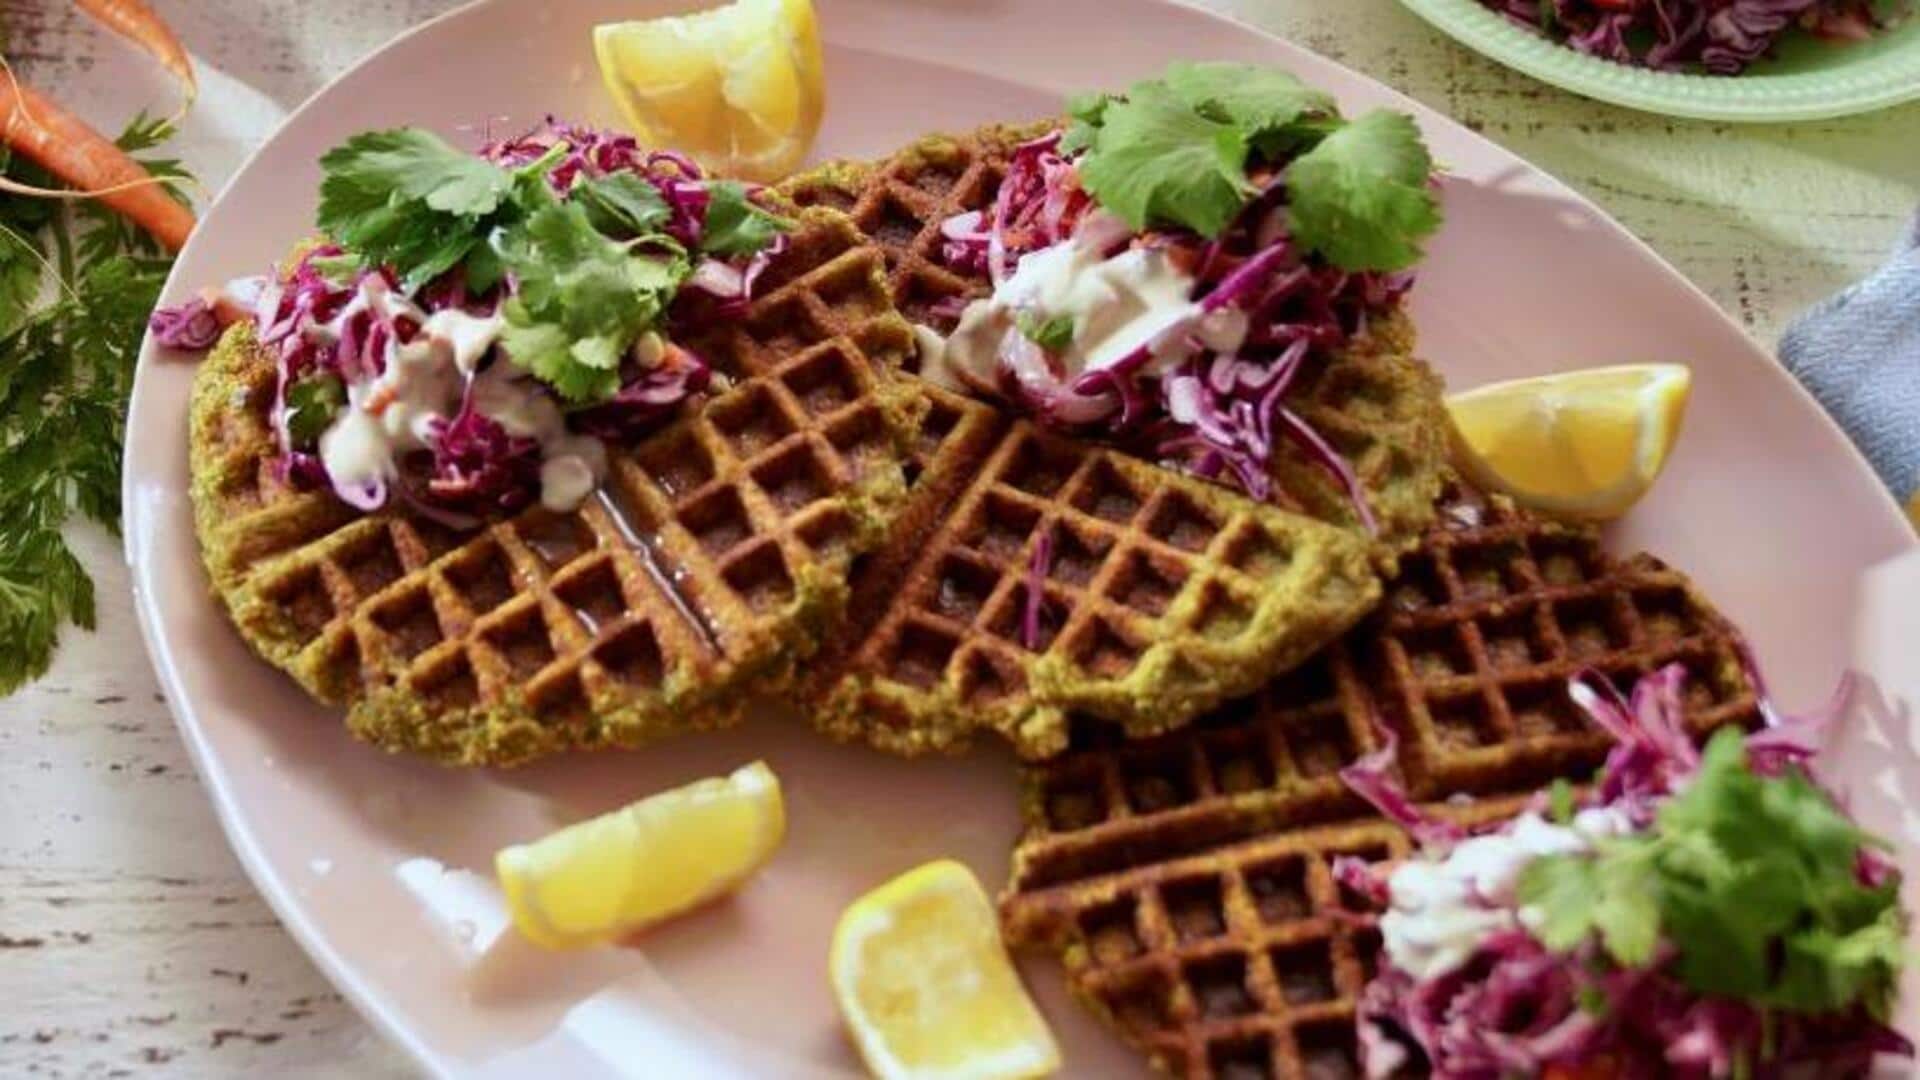 Serve your guests some delicious fusion falafel waffles